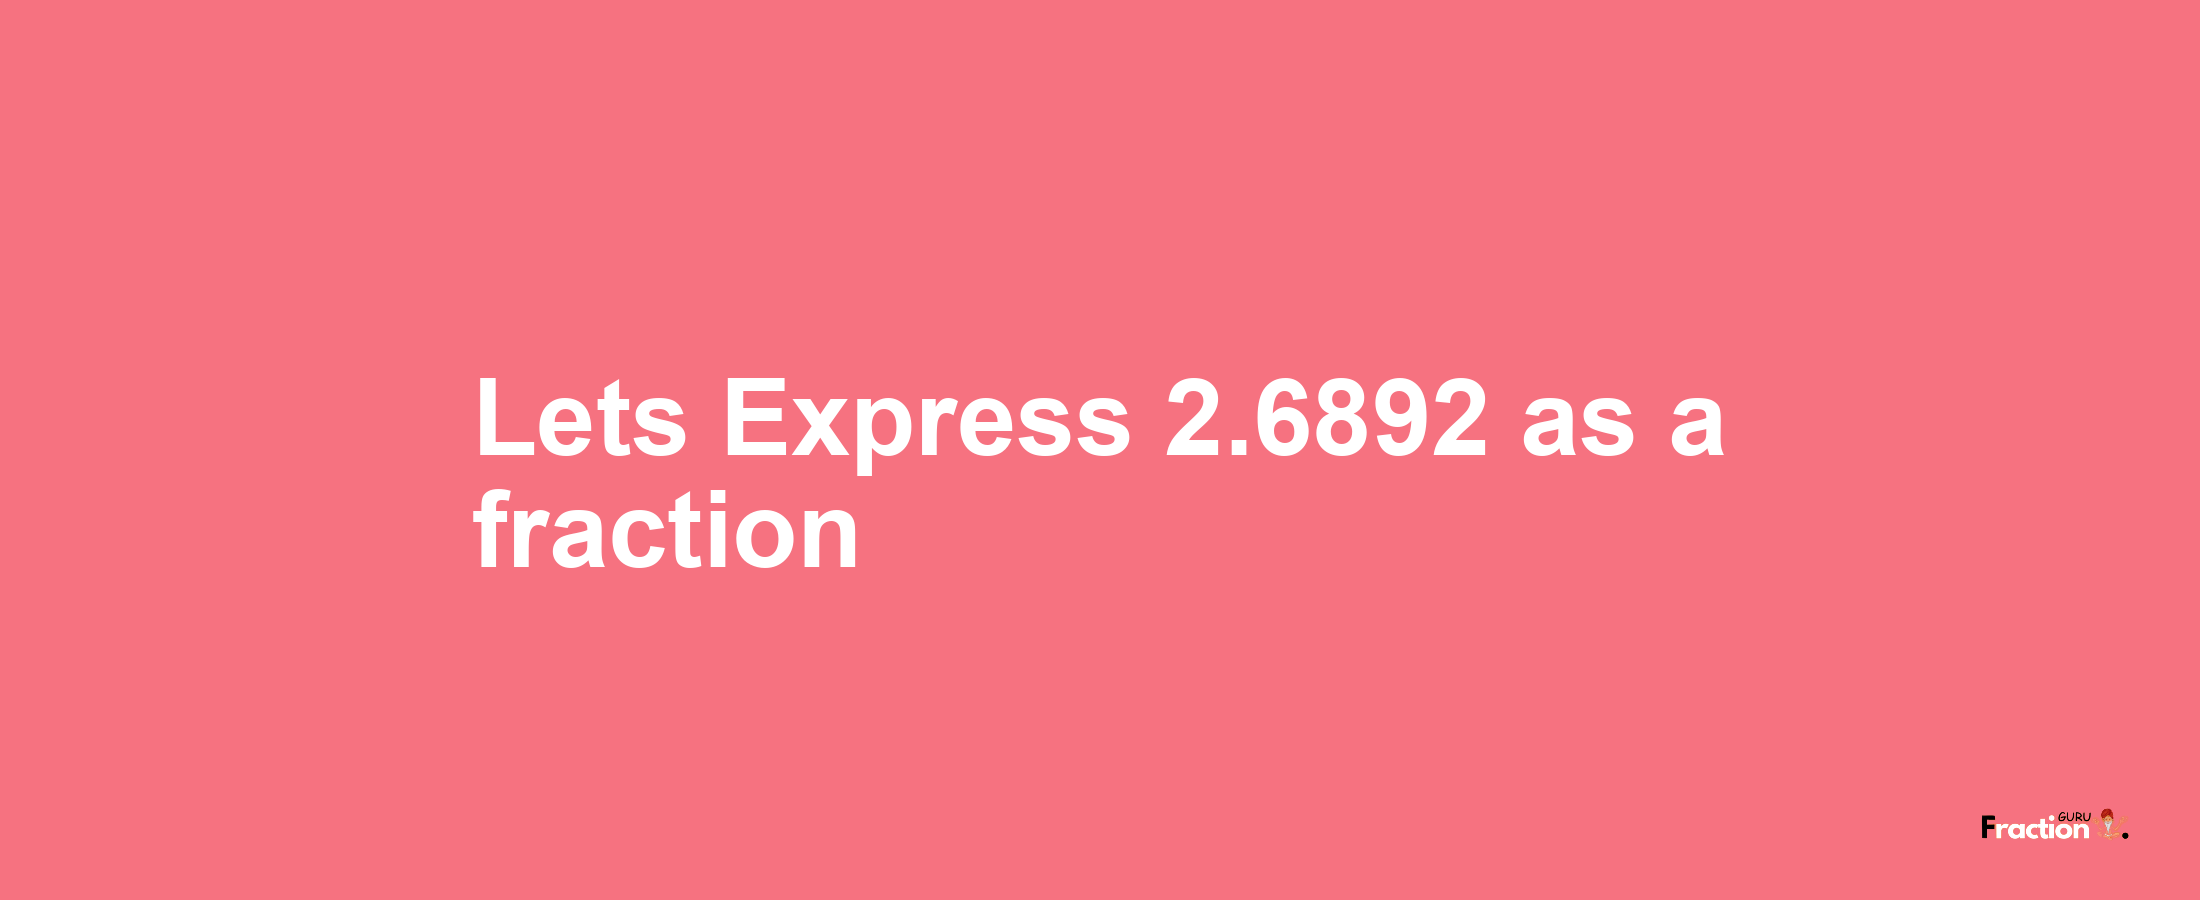 Lets Express 2.6892 as afraction